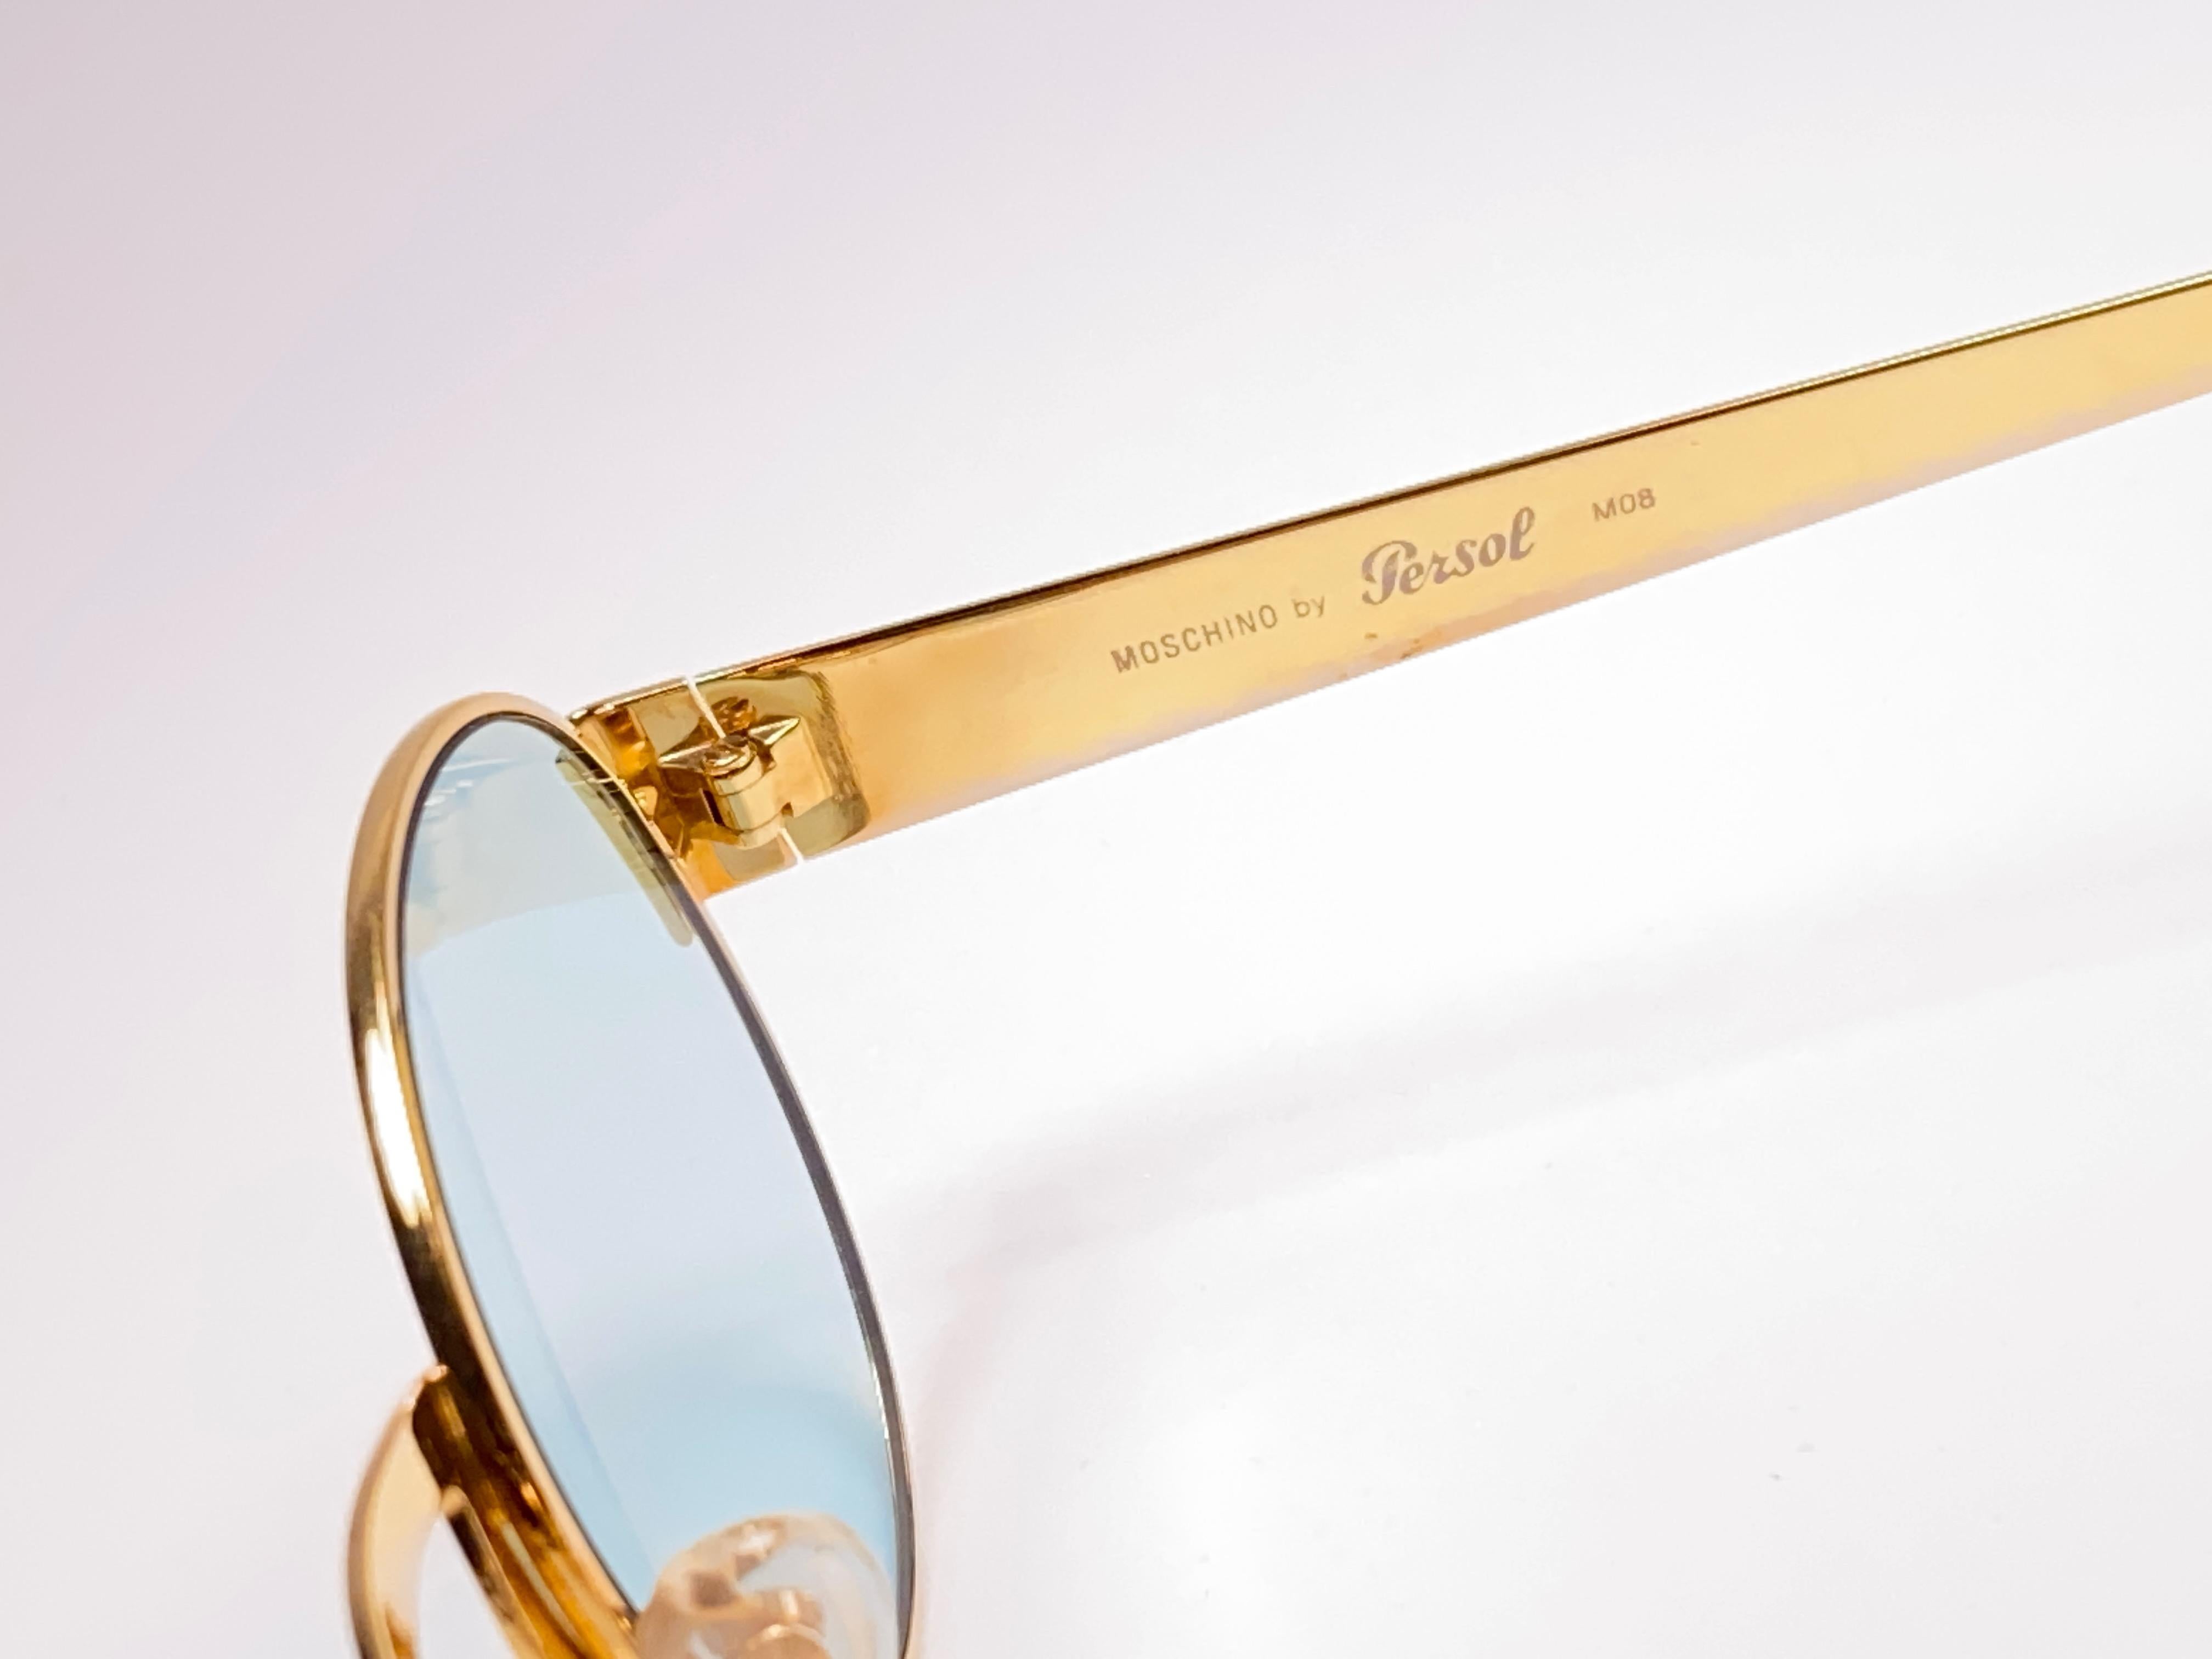 New Vintage Moschino By Persol M08 Frame Medium Round Gold Sunglasses  In New Condition In Baleares, Baleares